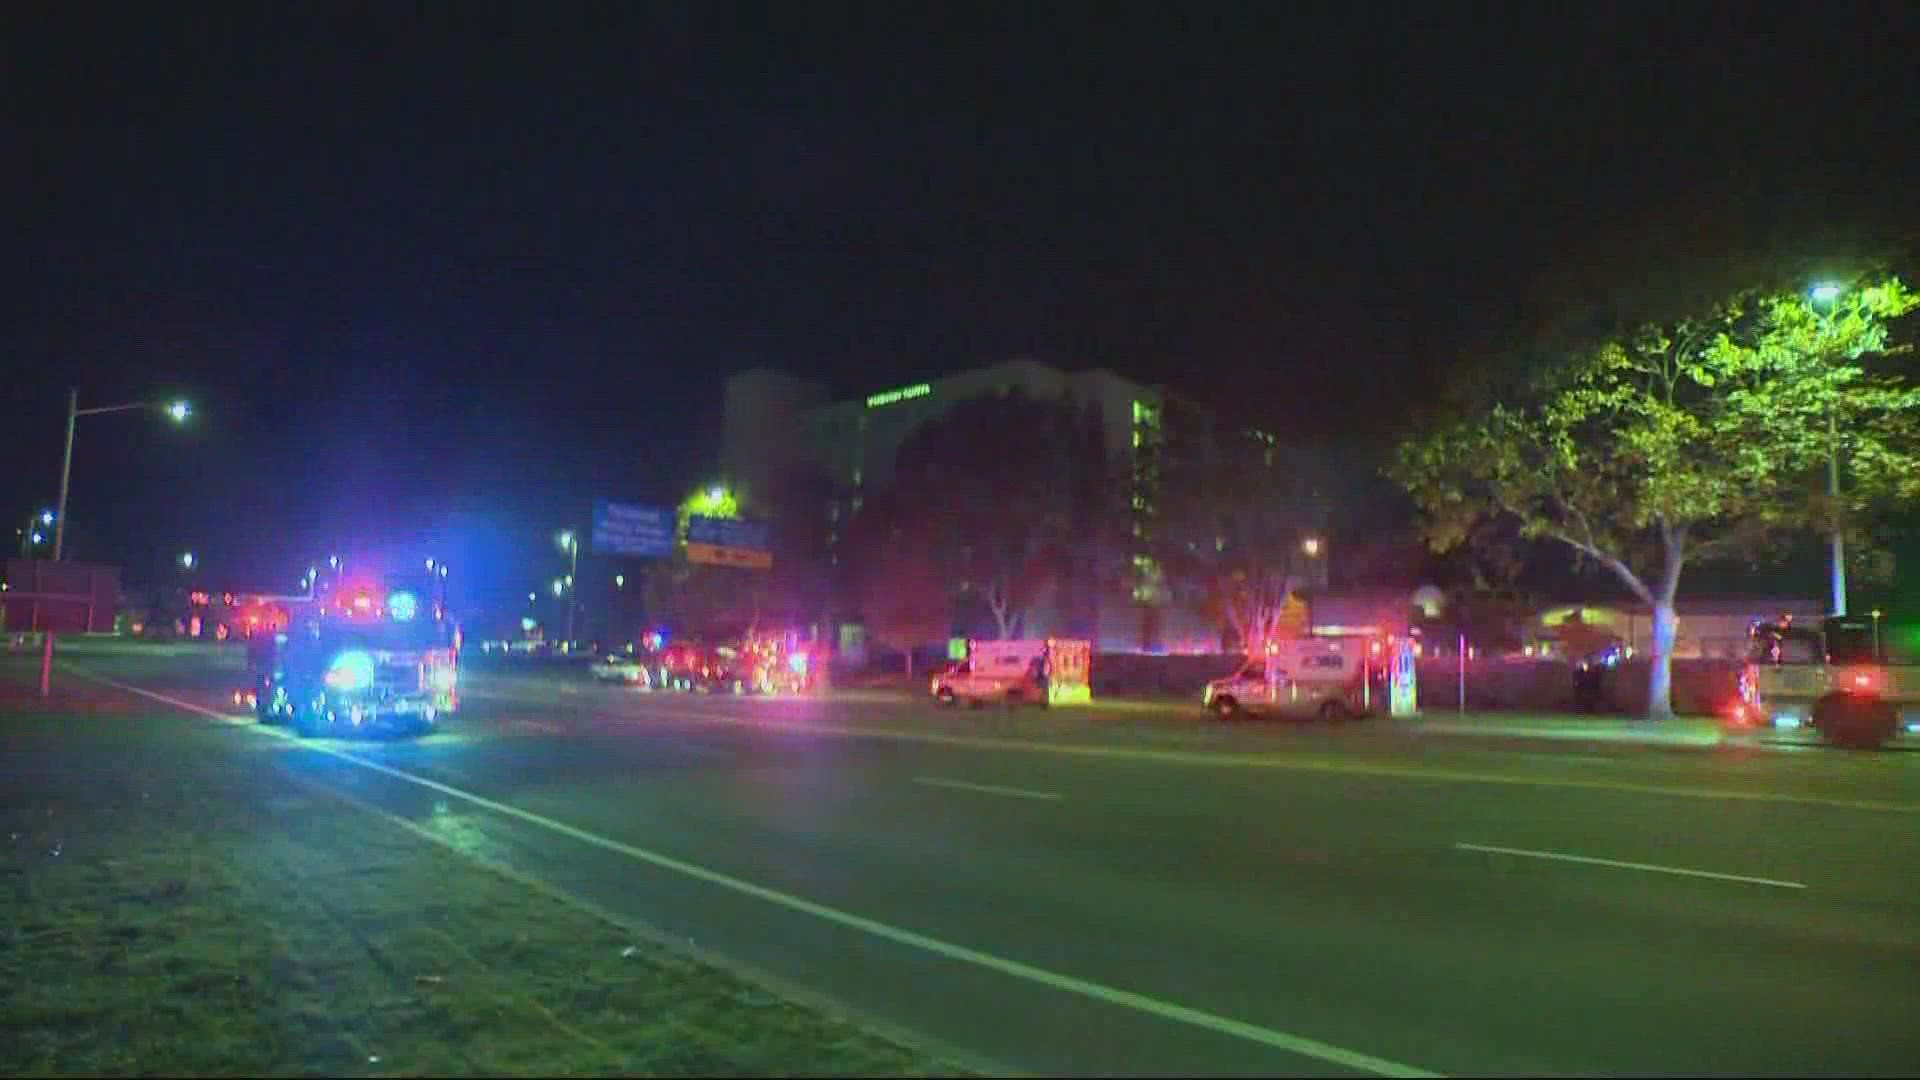 A person was shot at the Embassy Suites near PDX around 9:30 p.m. Saturday. And at 8 p.m., a teenage girl was found in North Portland suffering from a gunshot wound.